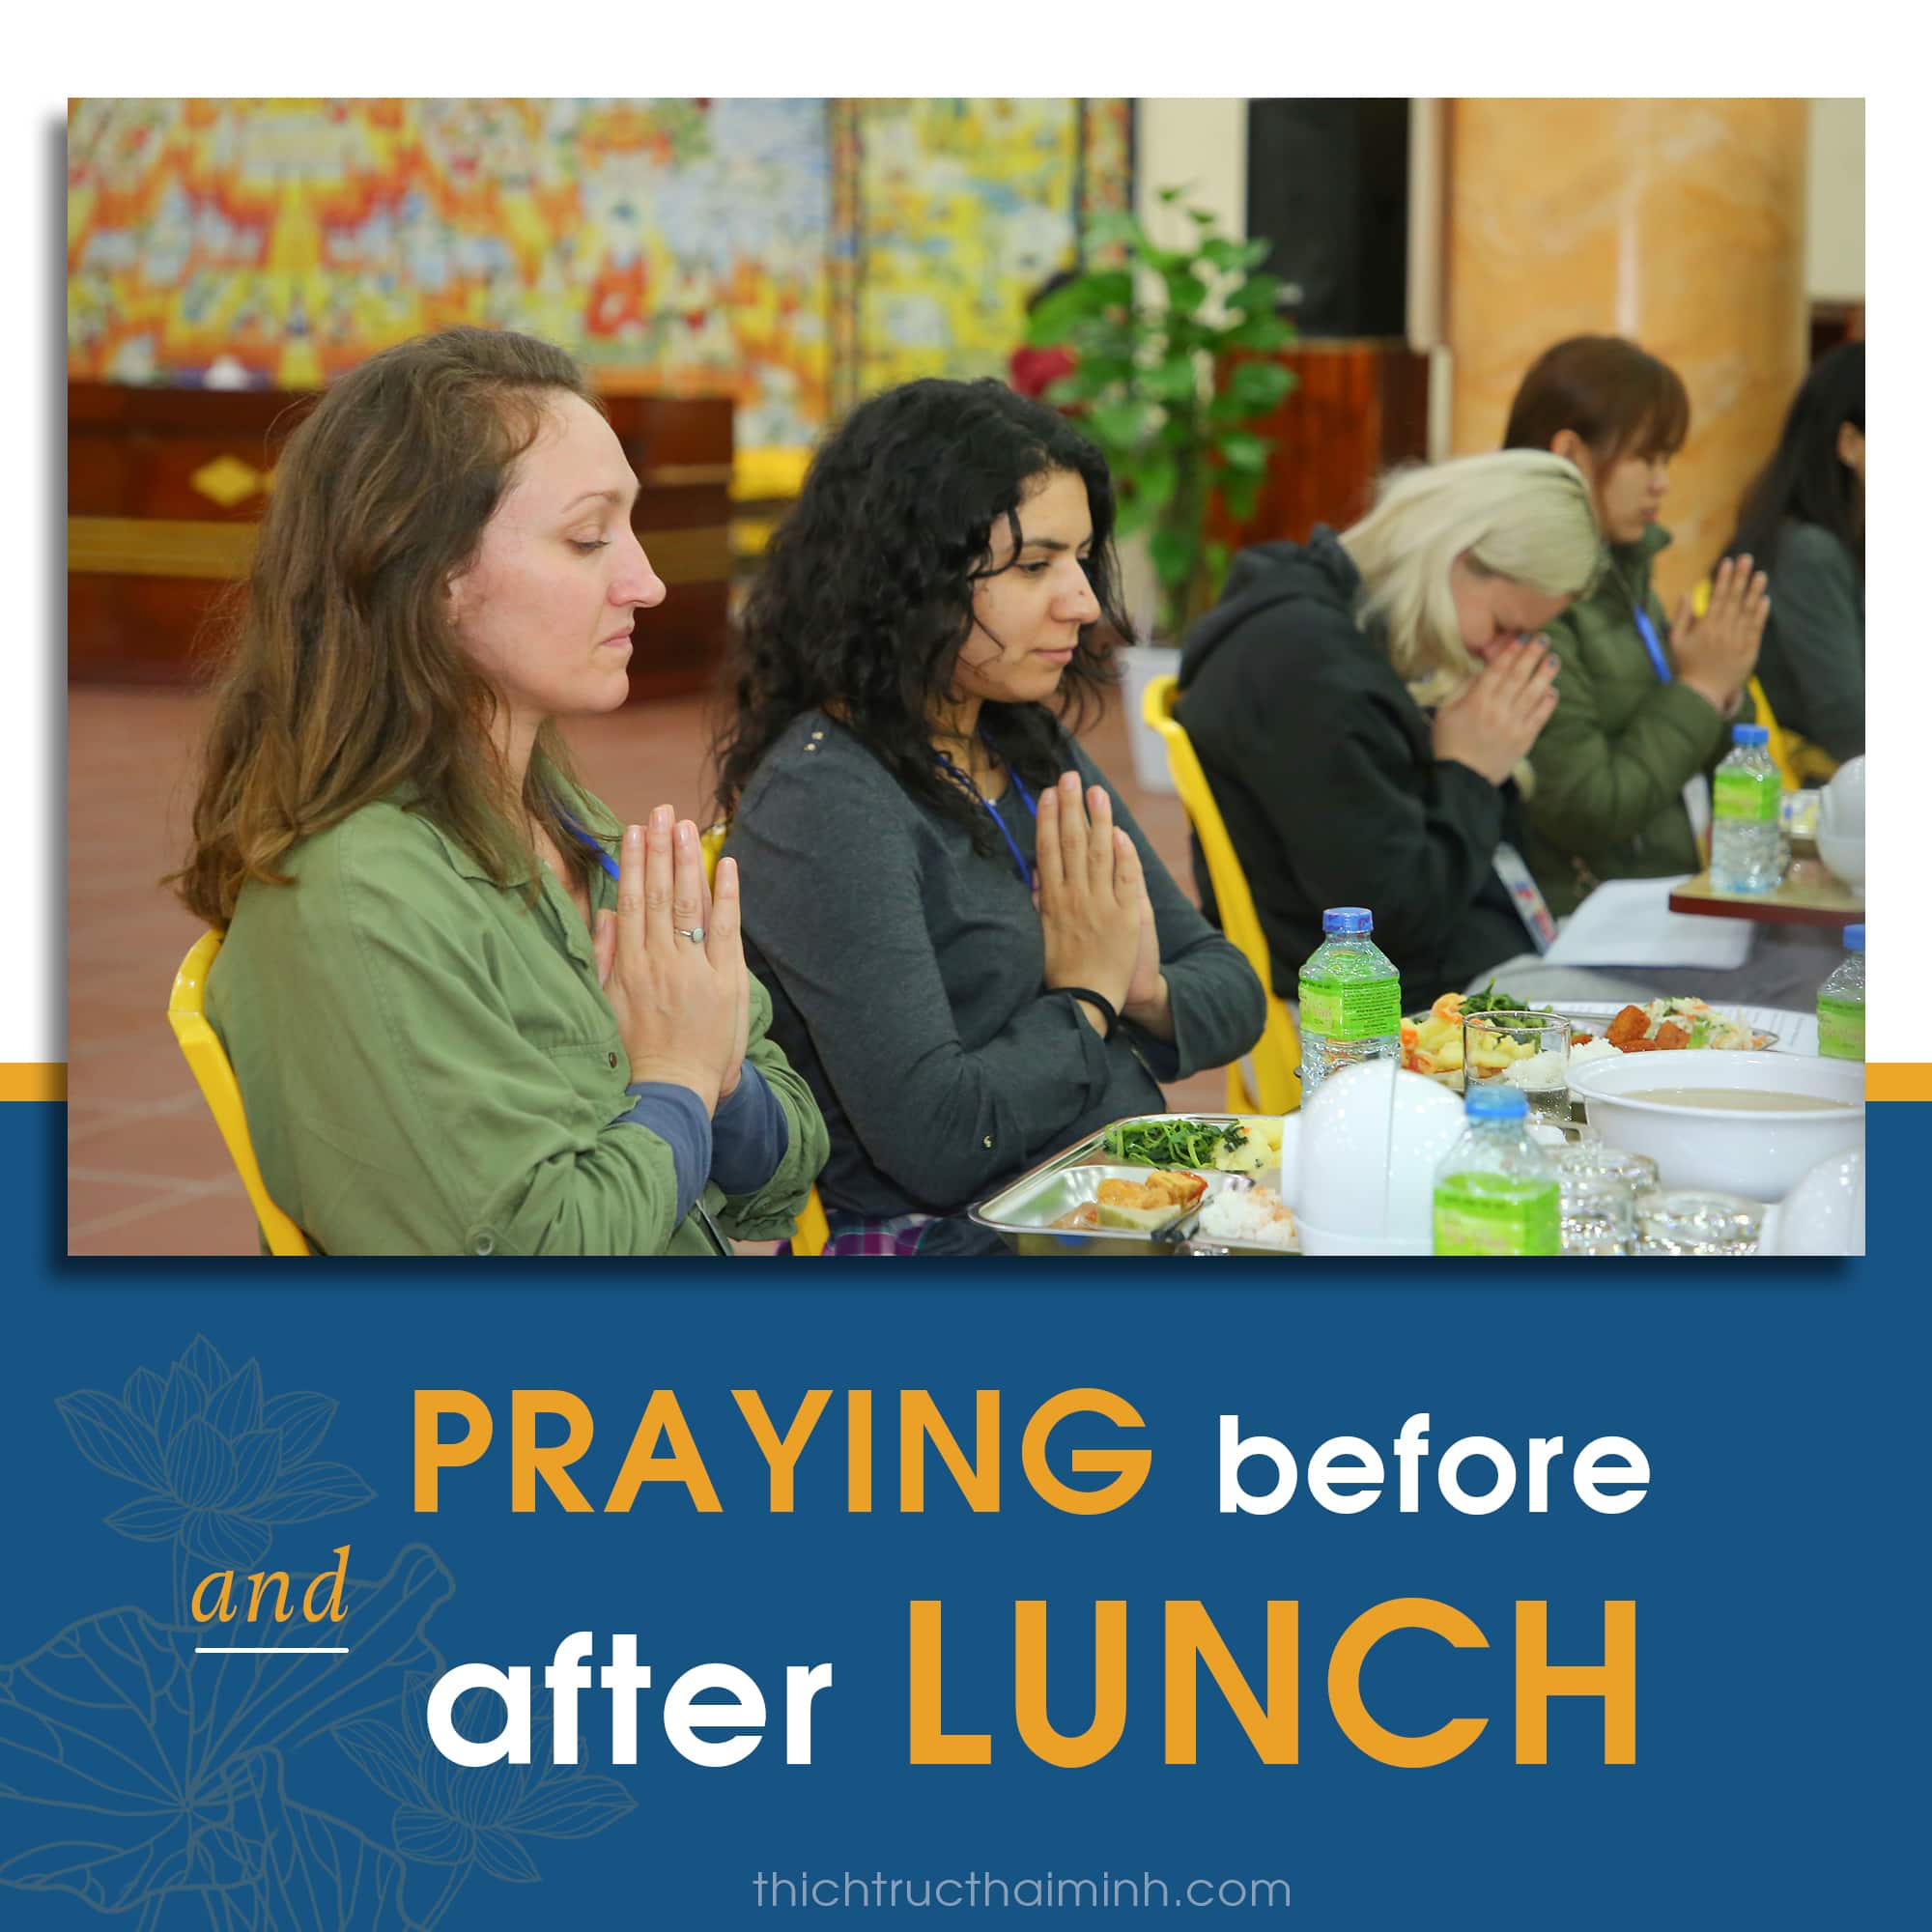 Praying before and after lunch.